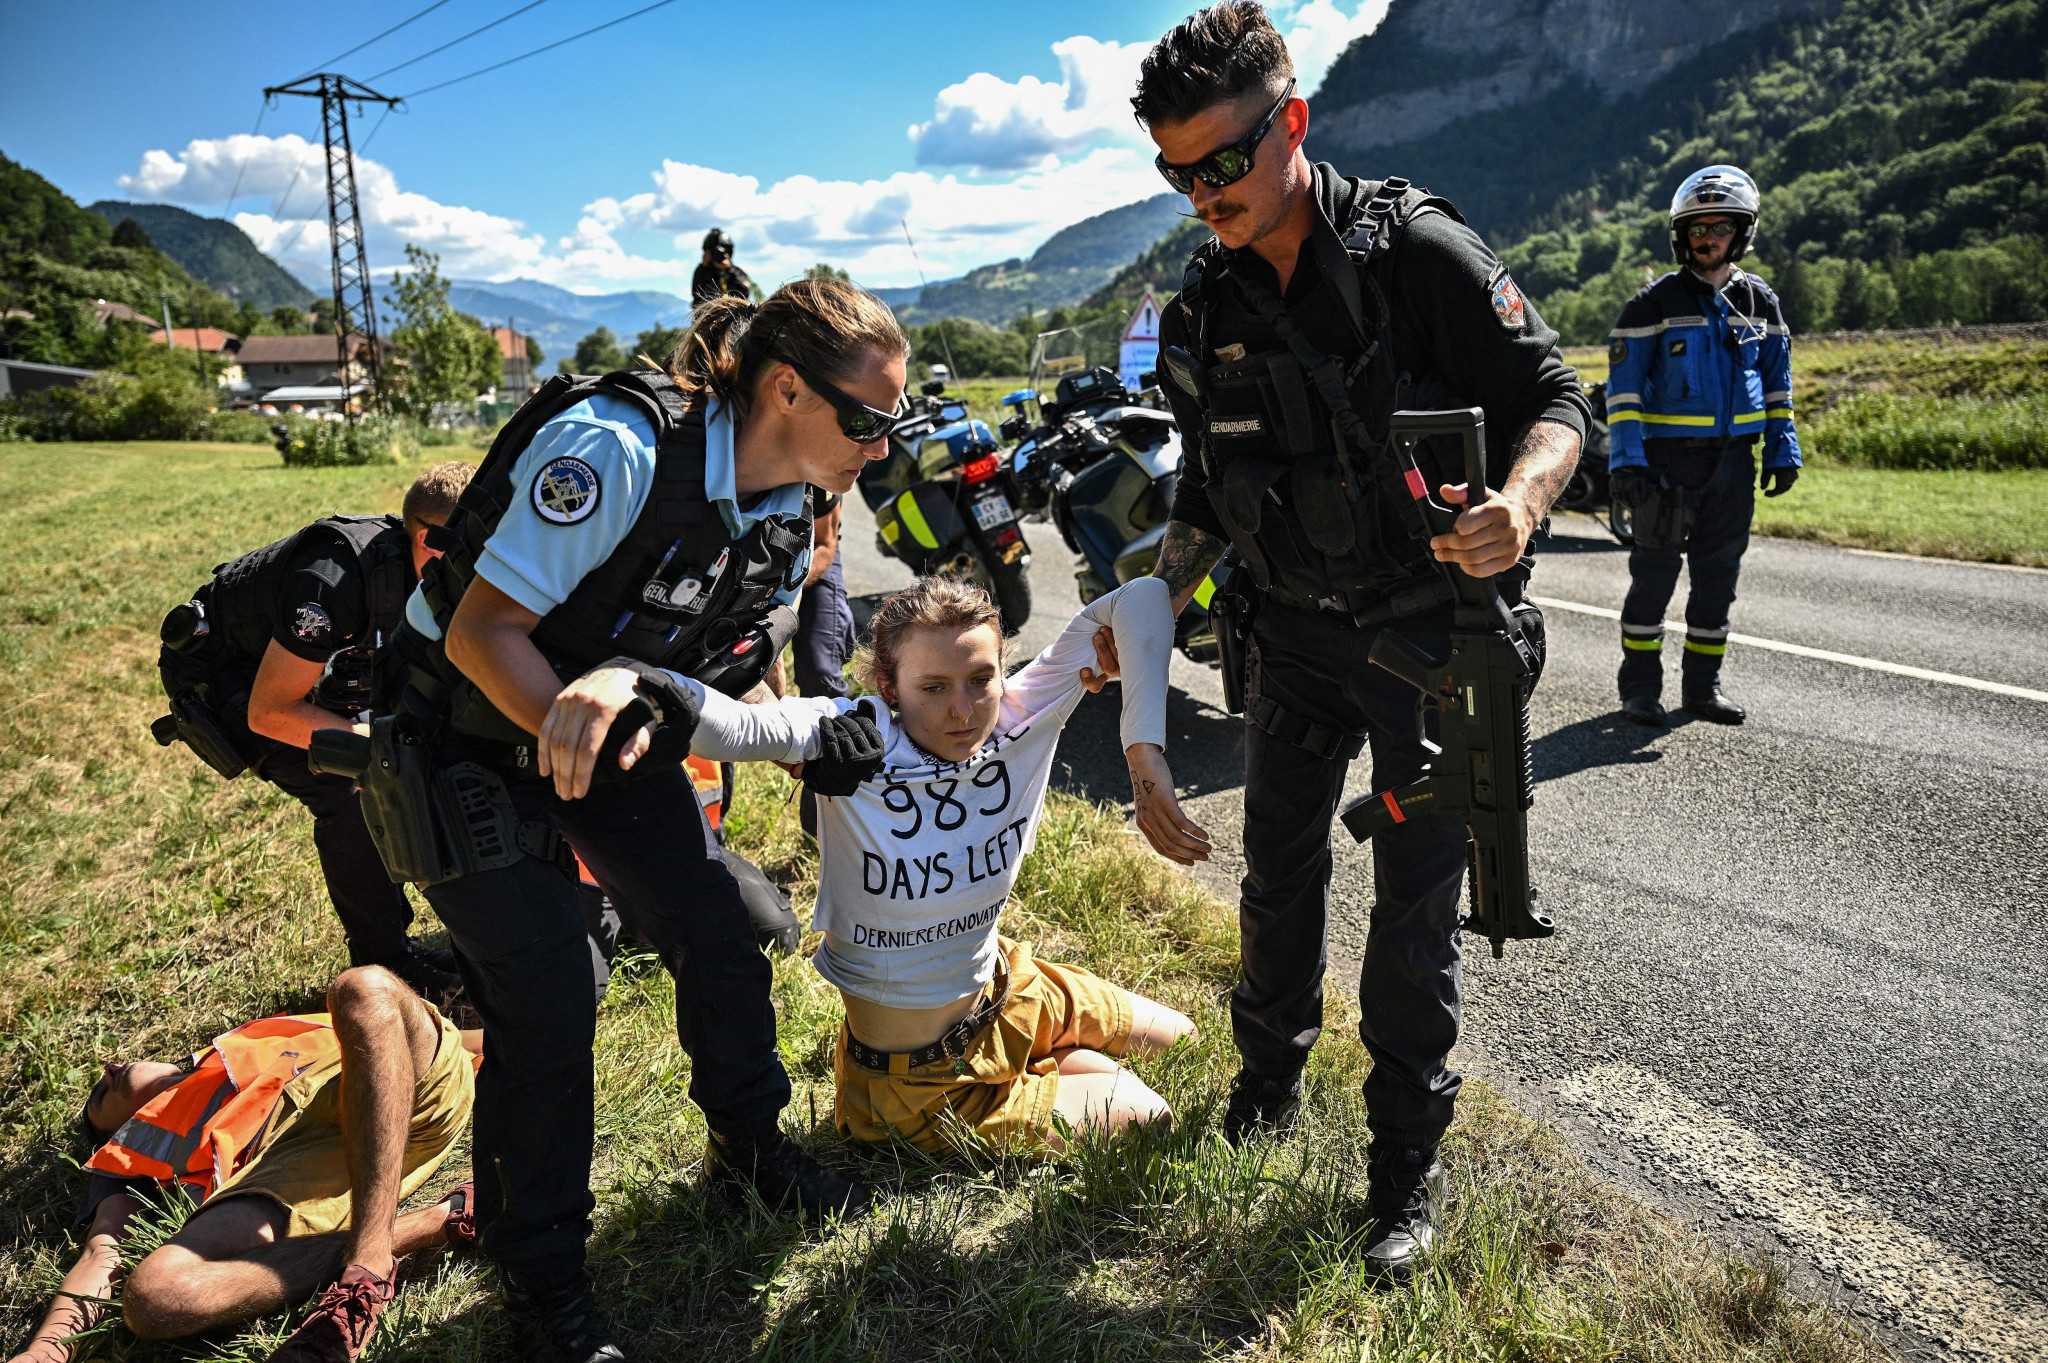 Climate activists are dragged away by armed police after disrupting the Tour de France ©Getty Images